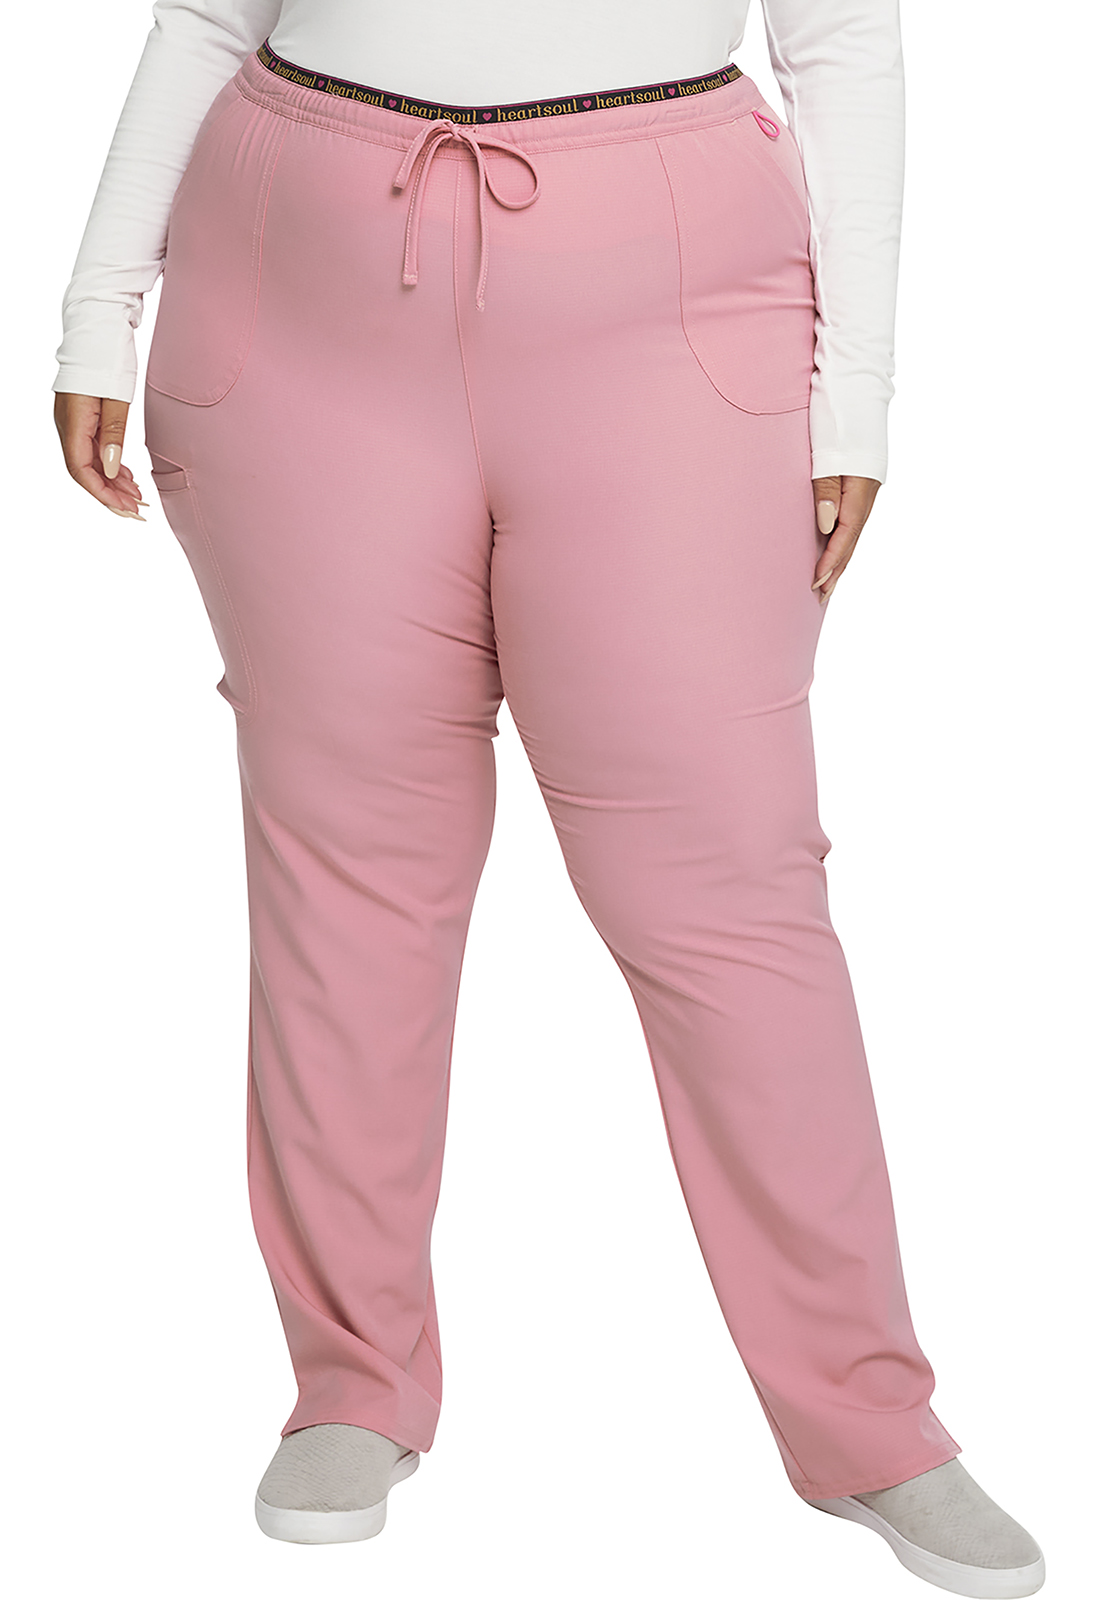 HeartSoul - Break On Through - Berry Blast and Fairy Tale Pink Pants –  𝗖𝗟𝗘𝗔𝗥𝗔𝗡𝗖𝗘!